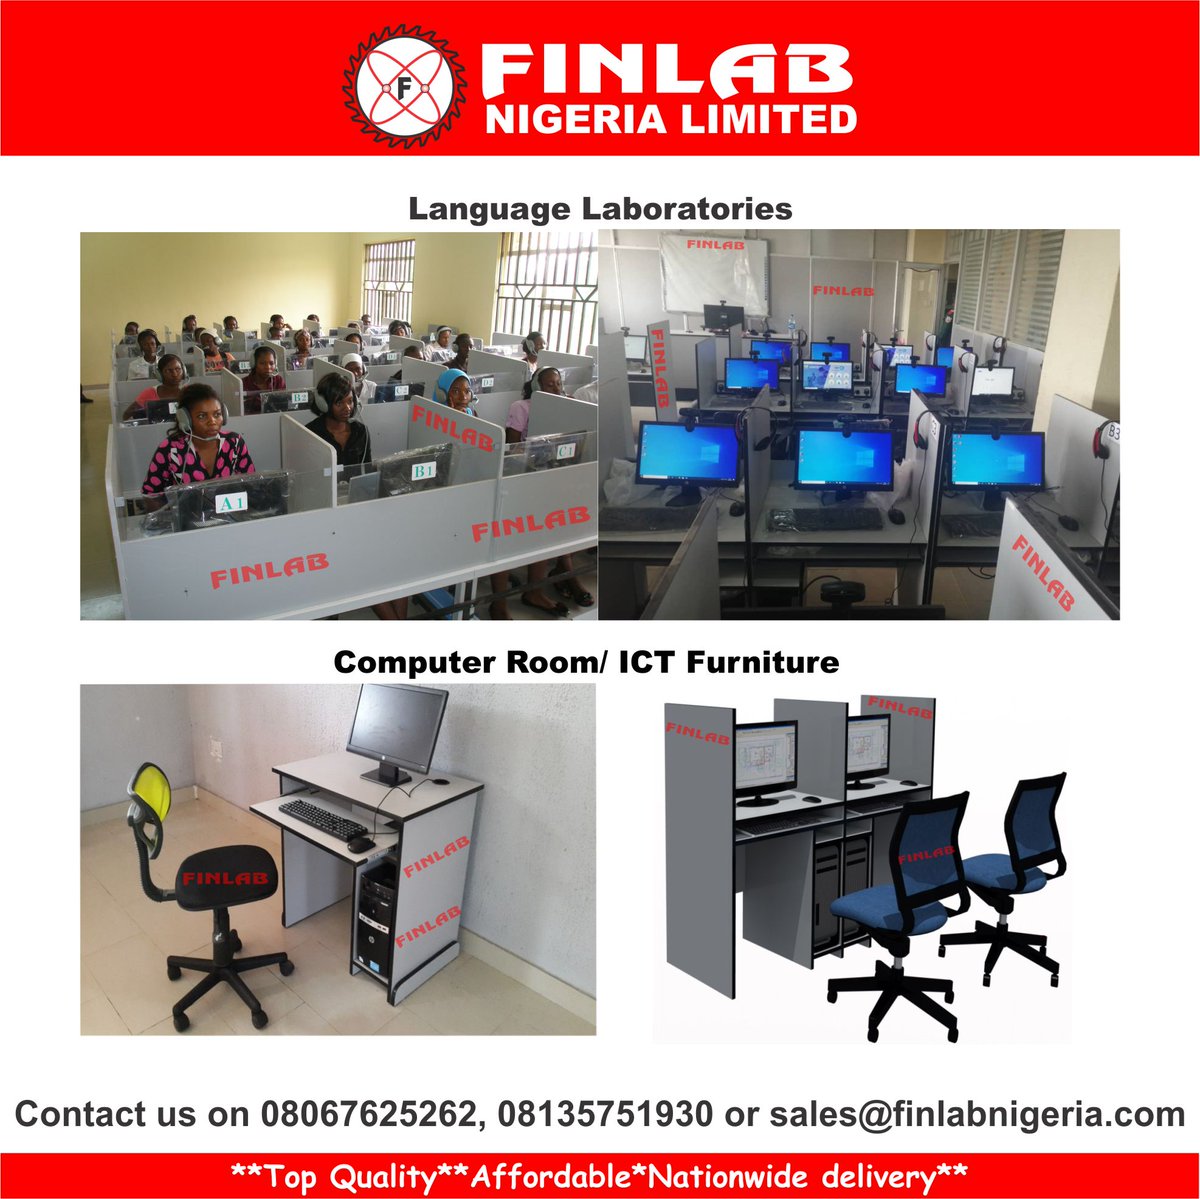 Top Quality Language Laboratory and ICT Furniture.